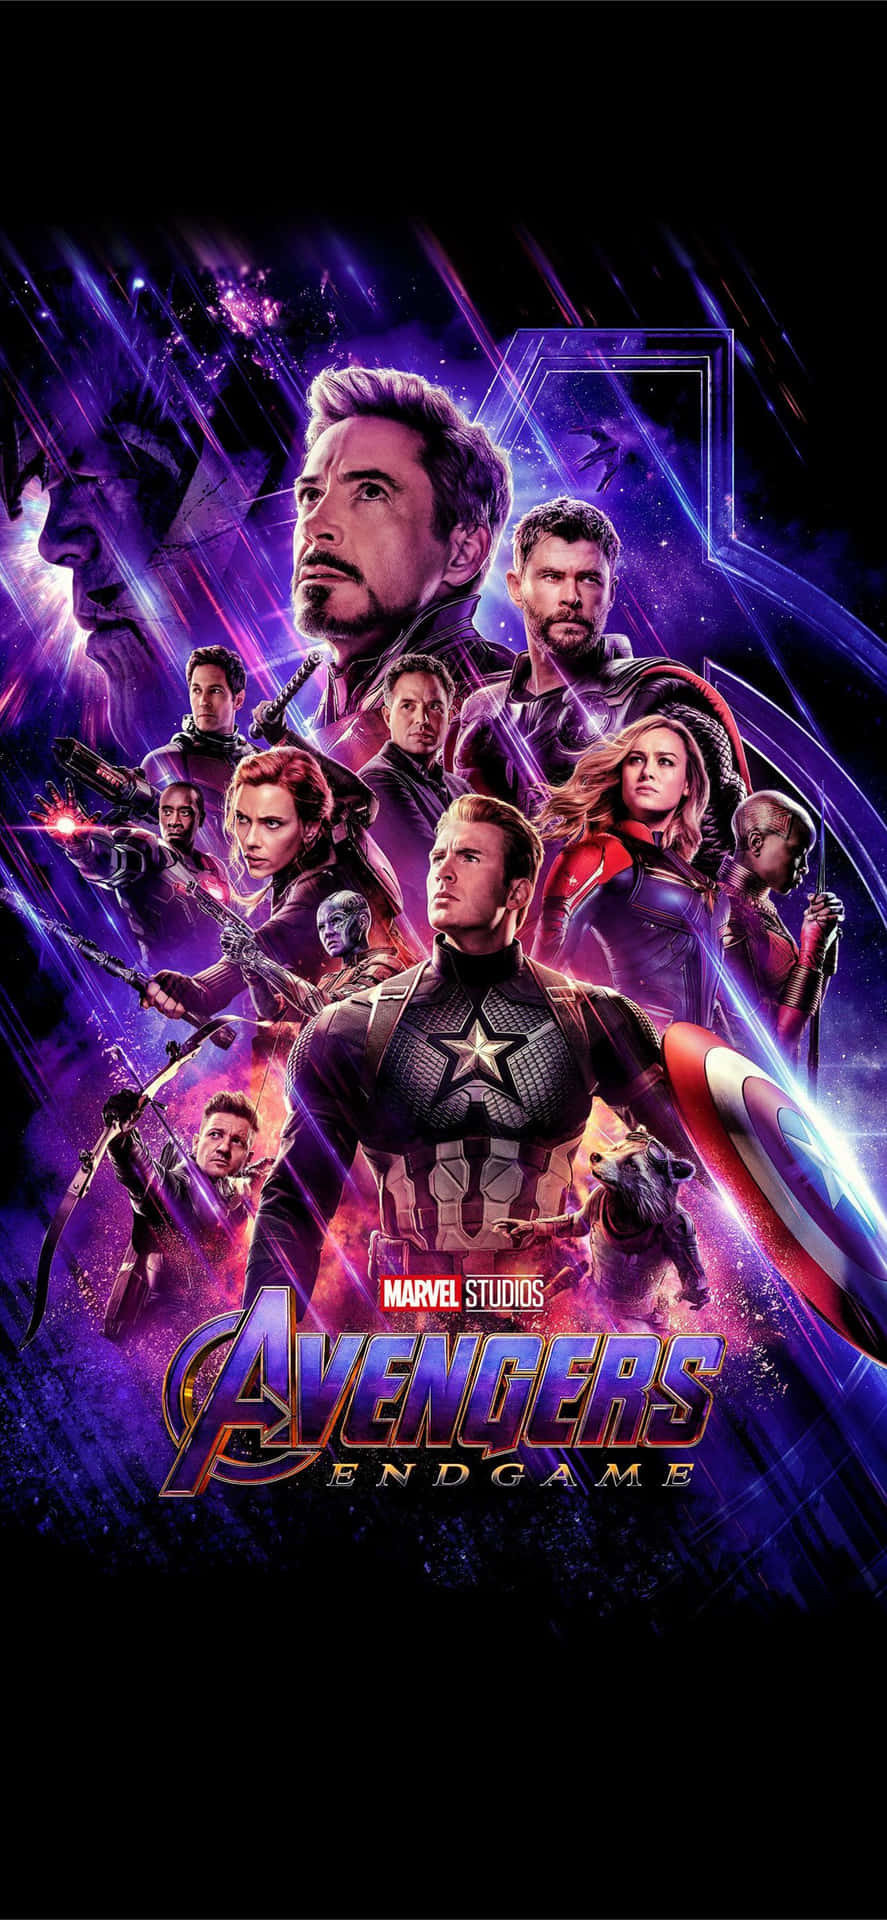 Unite with the Avengers and Join the Fight Against Thanos with the Avengers Endgame iPhone Wallpaper